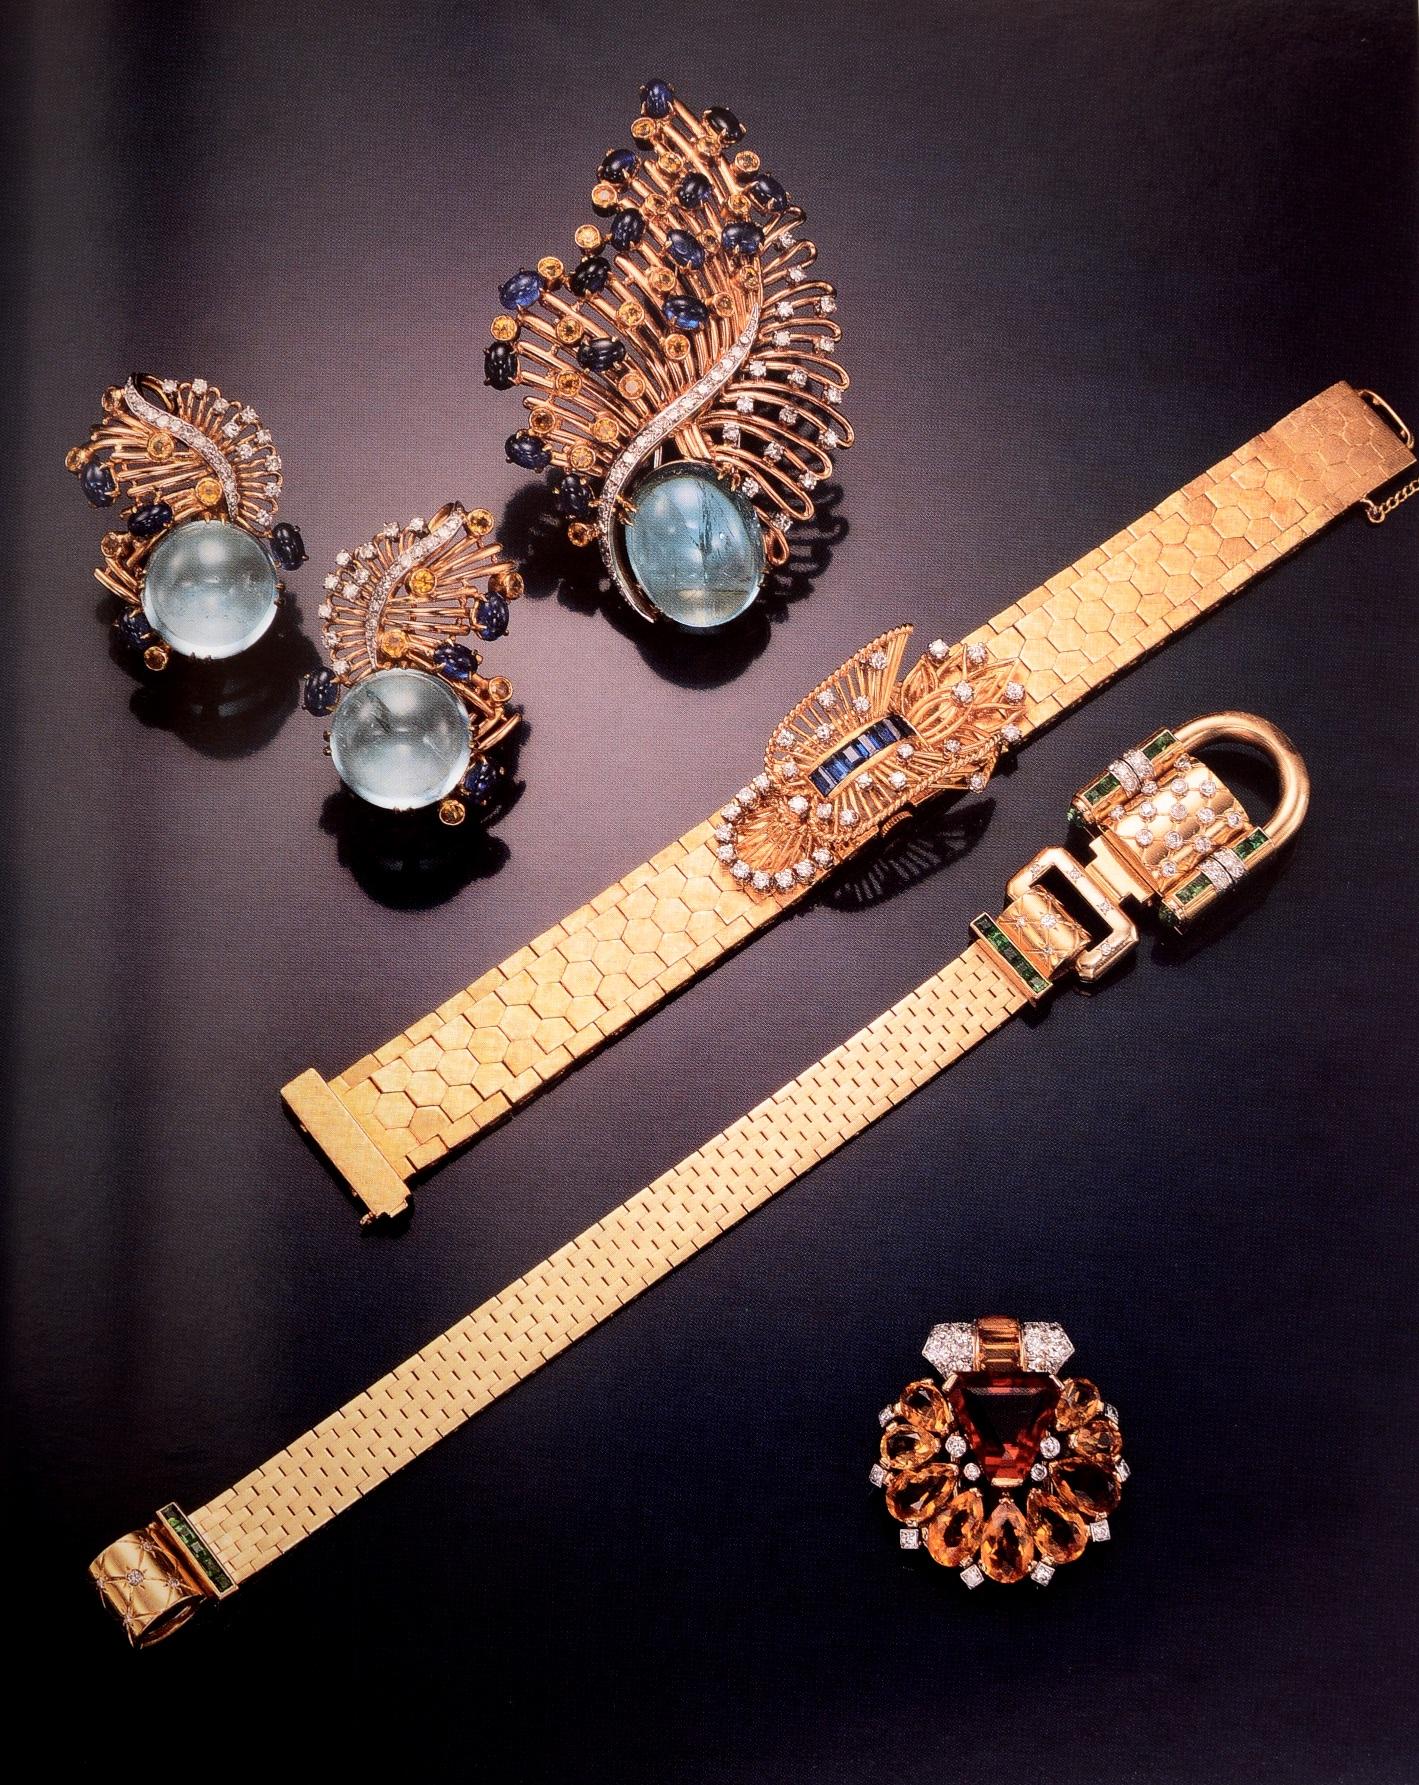 Magnificent Jewelry, New York, April 22-23, 1991, Sotheby's Sale # 6163 5